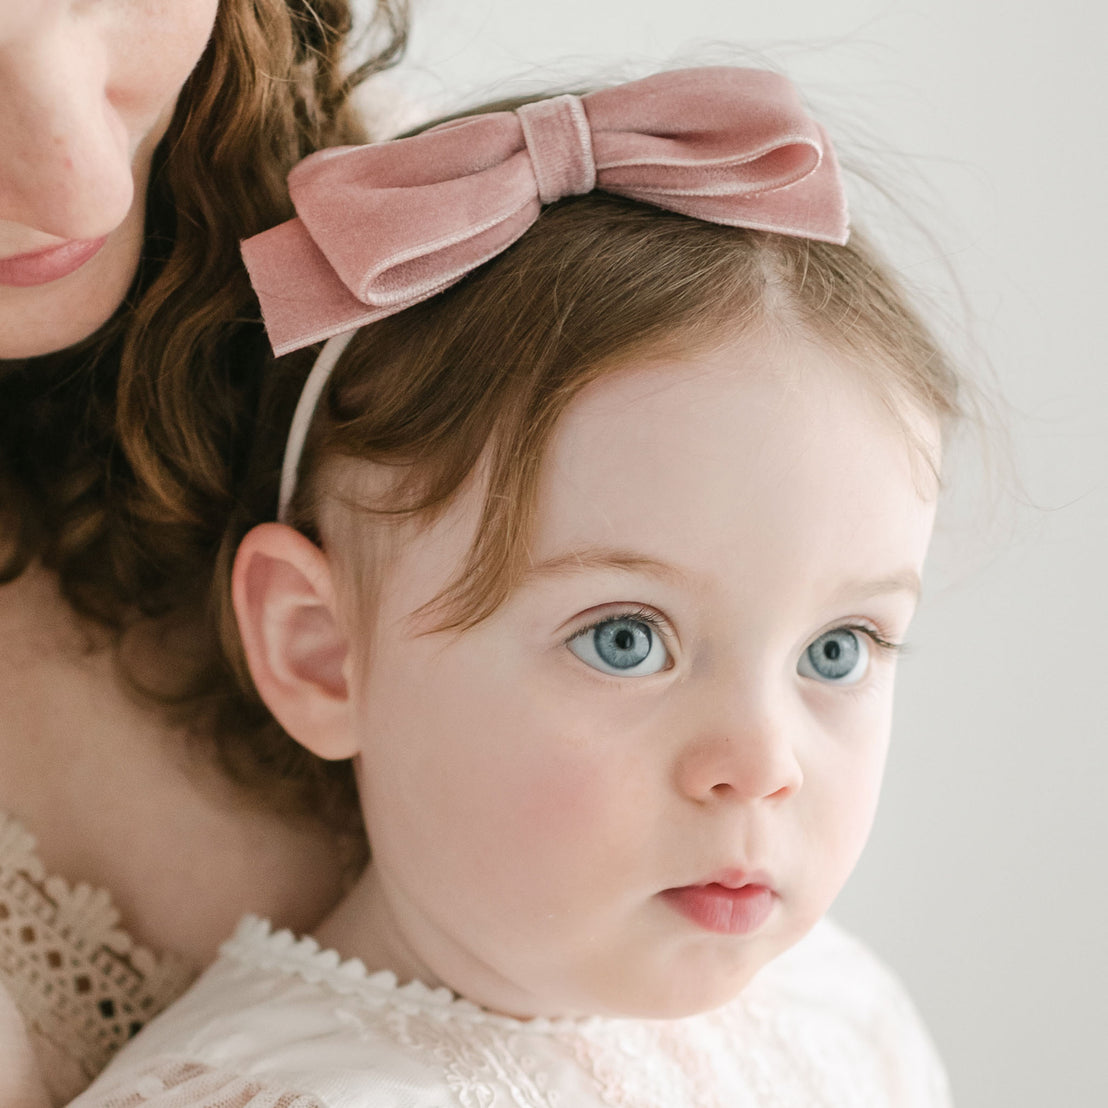 A close-up portrait of a baby with bright blue eyes wearing an Elizabeth Velvet Bow Headband in vintage pink, held by her mother whose face is partially visible as she embraces the child.